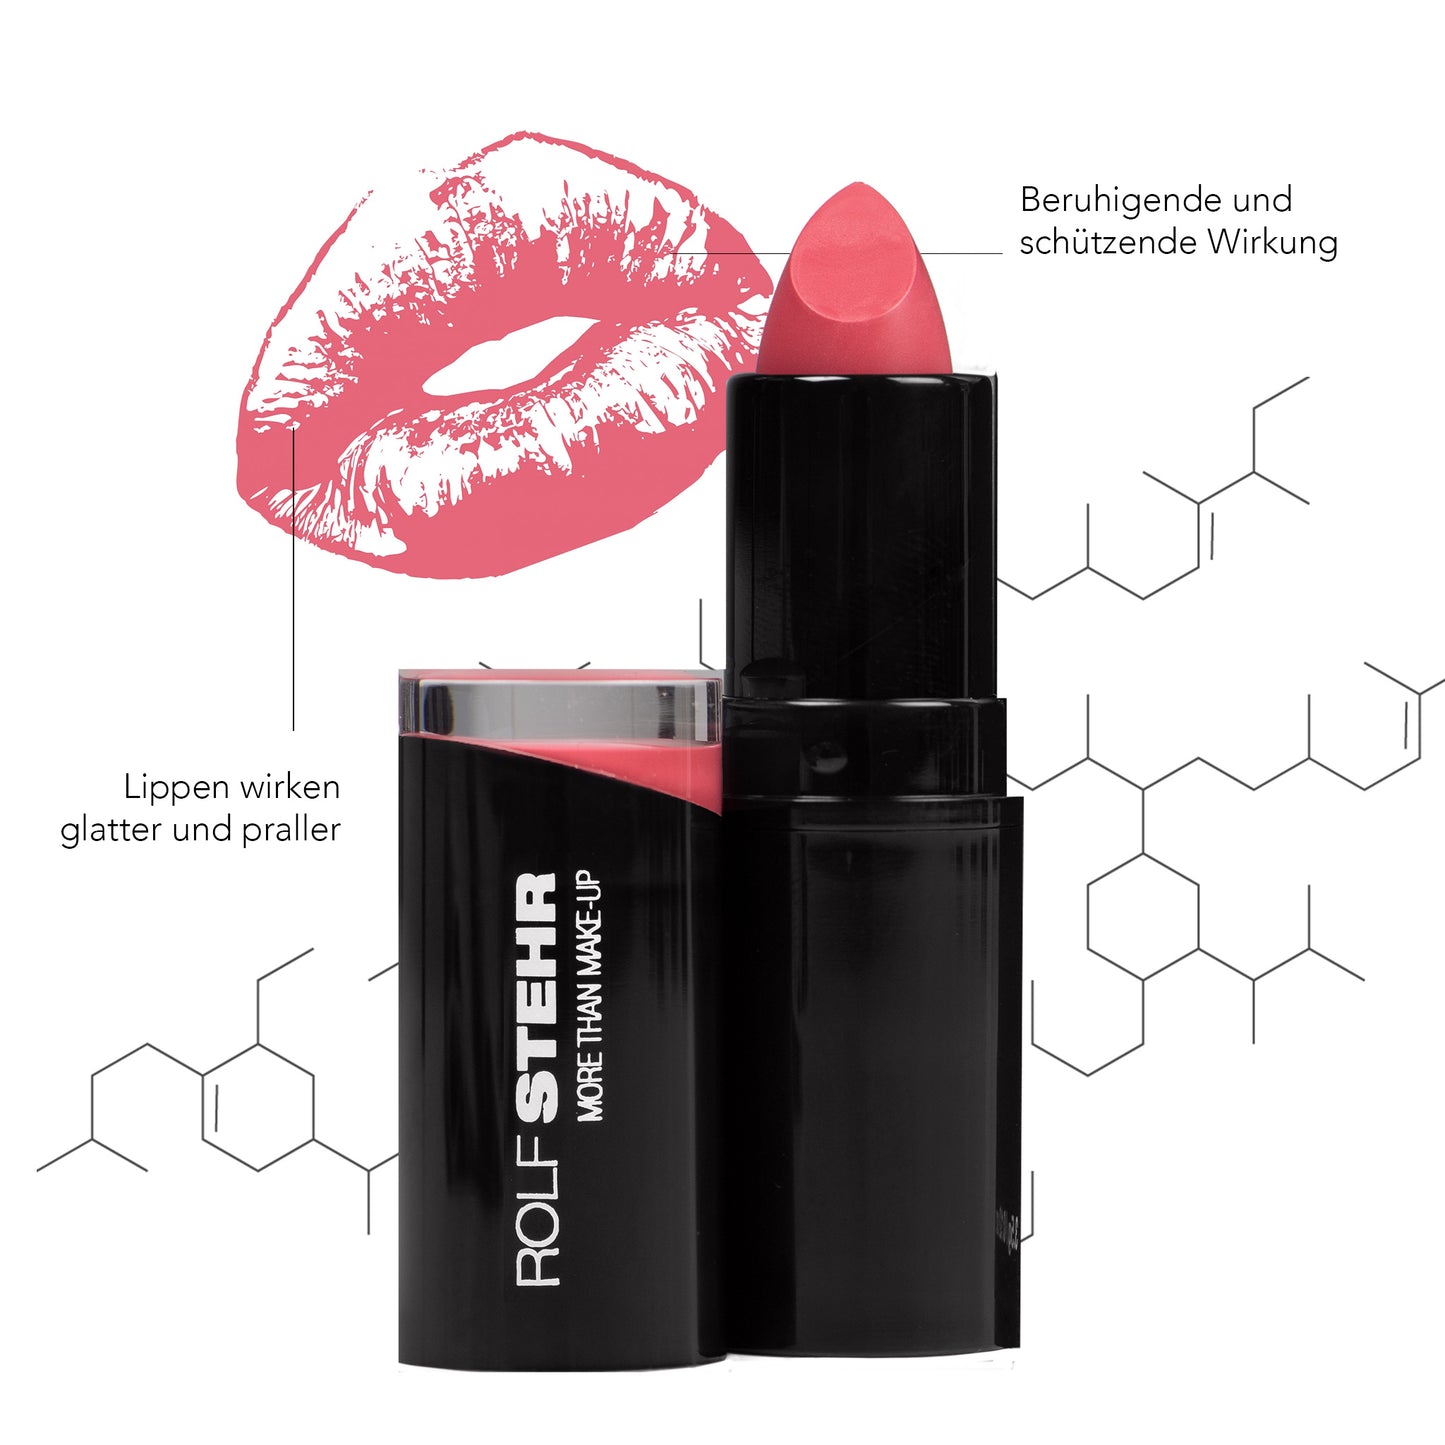 Lipstick Passion - Raspberry 210 <br> More than Make up